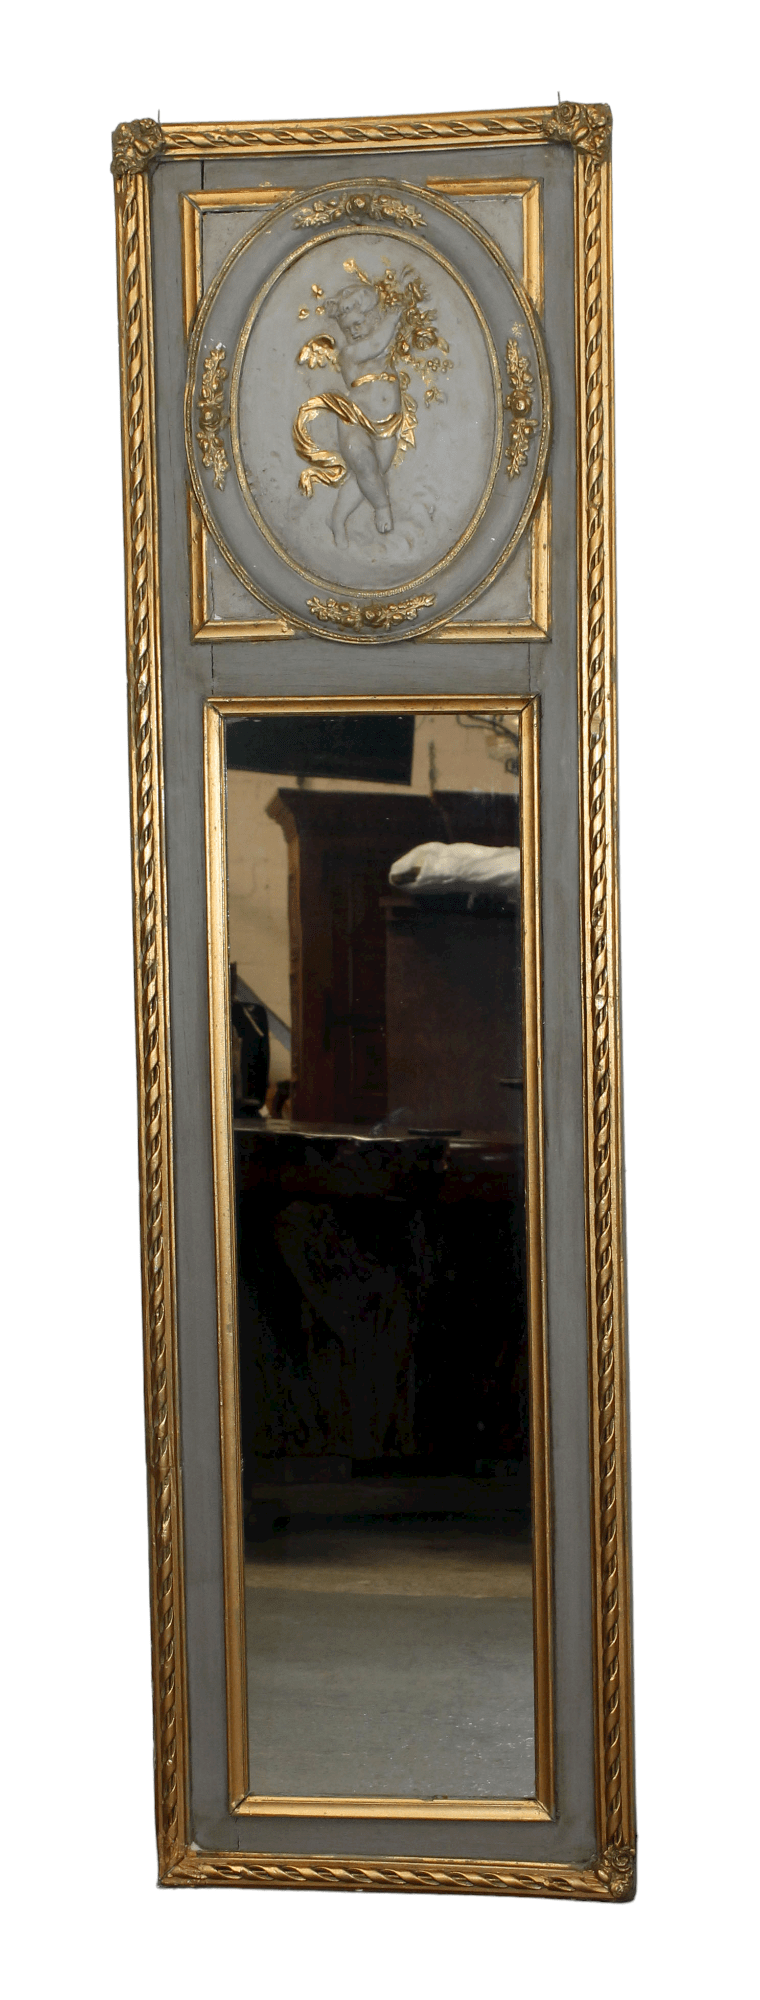 French painted trumeau mirror with cherub